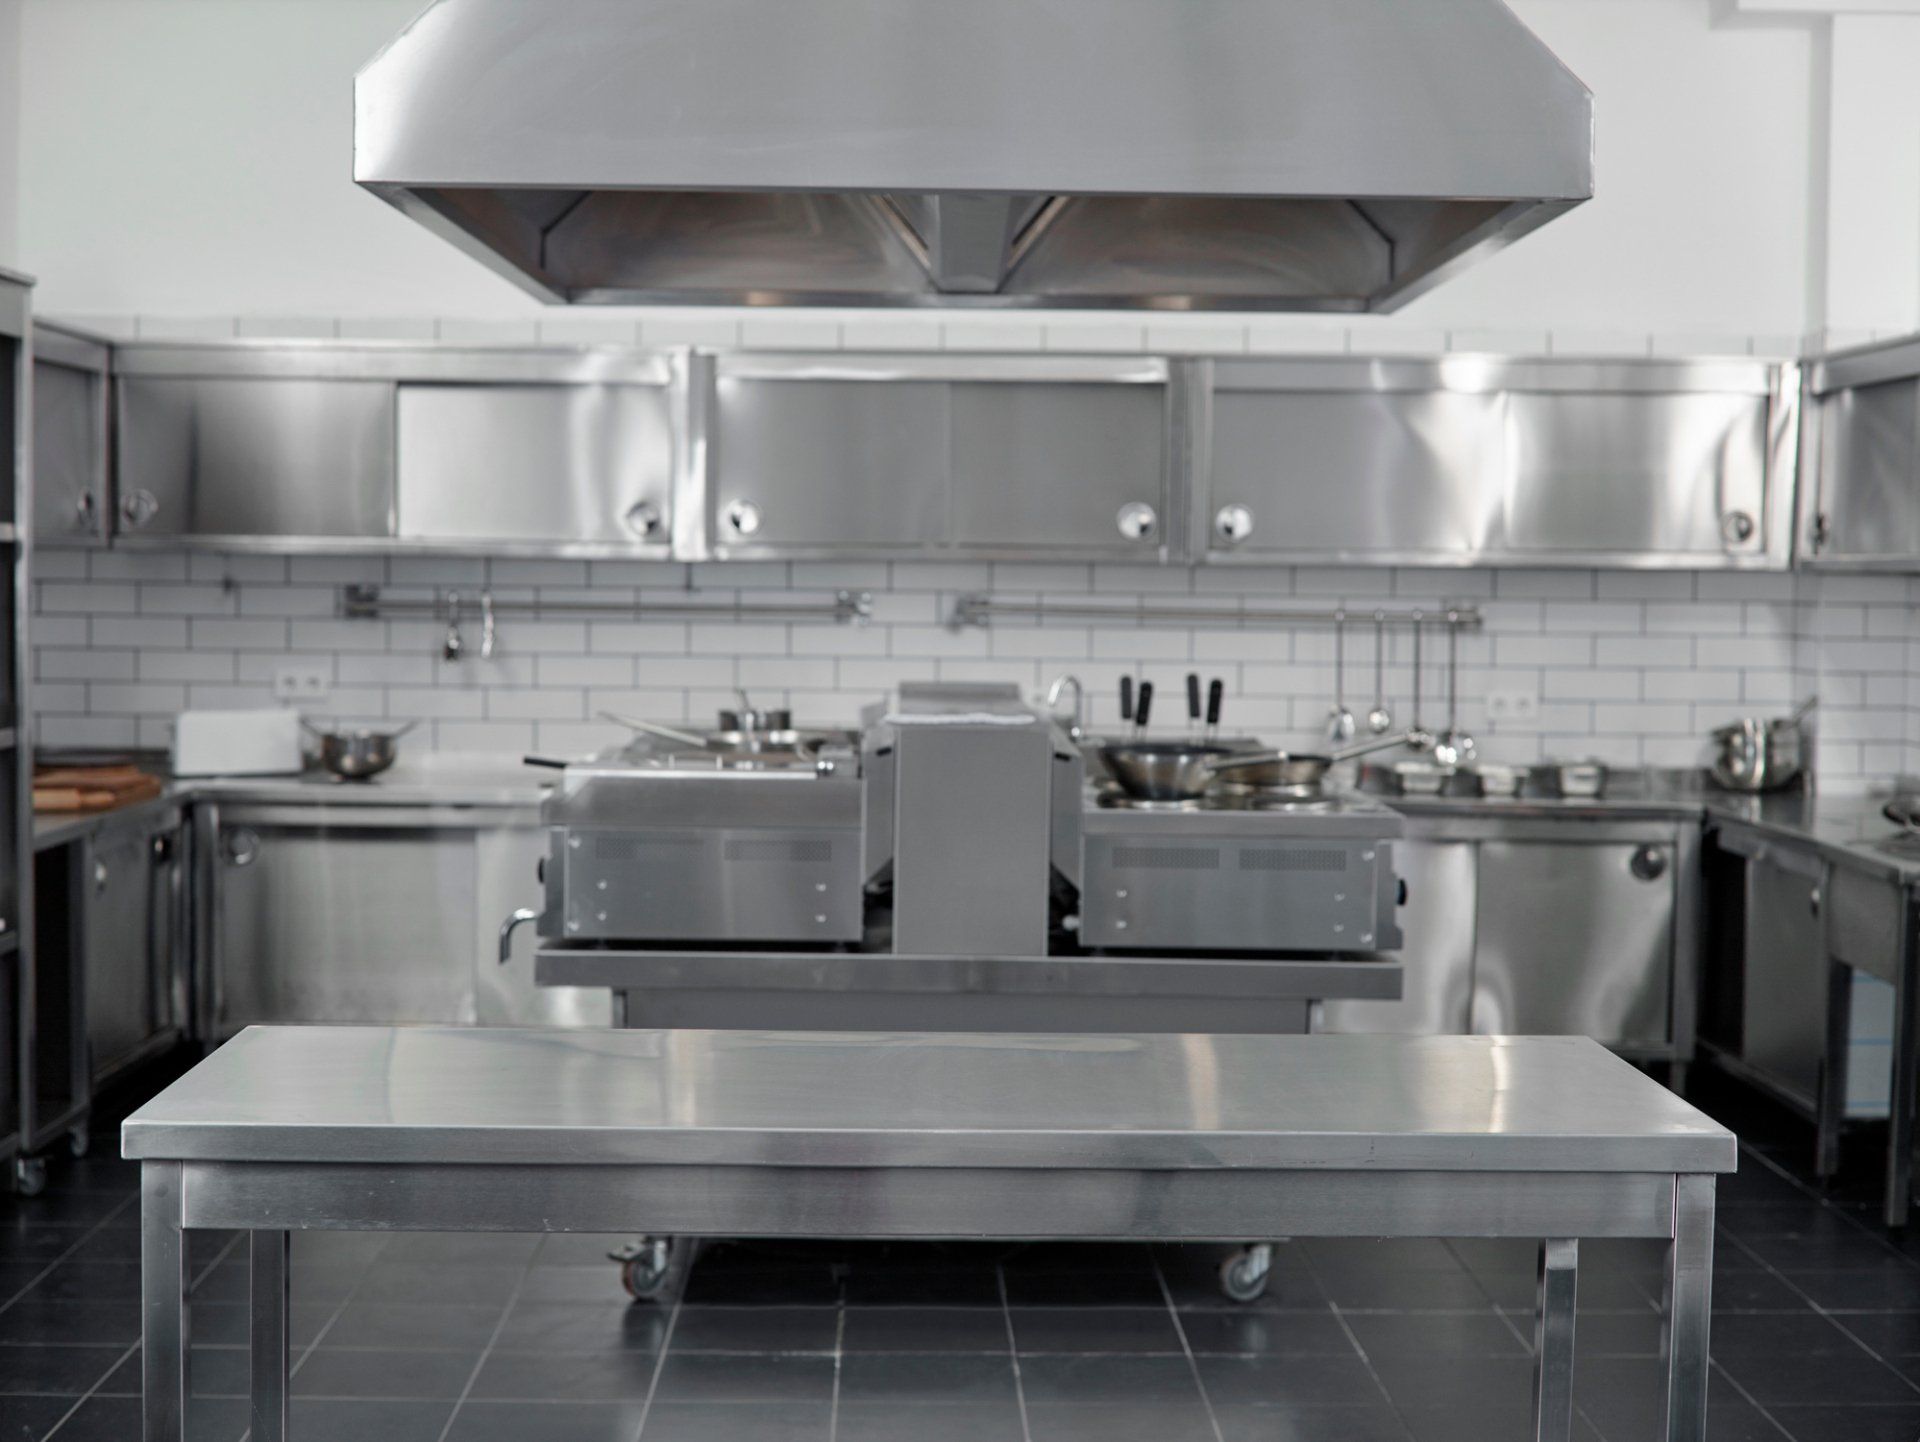 Empty Commercial Kitchen - Fuquay Varina, NC - RC Commercial Equipment Repair Services Inc.